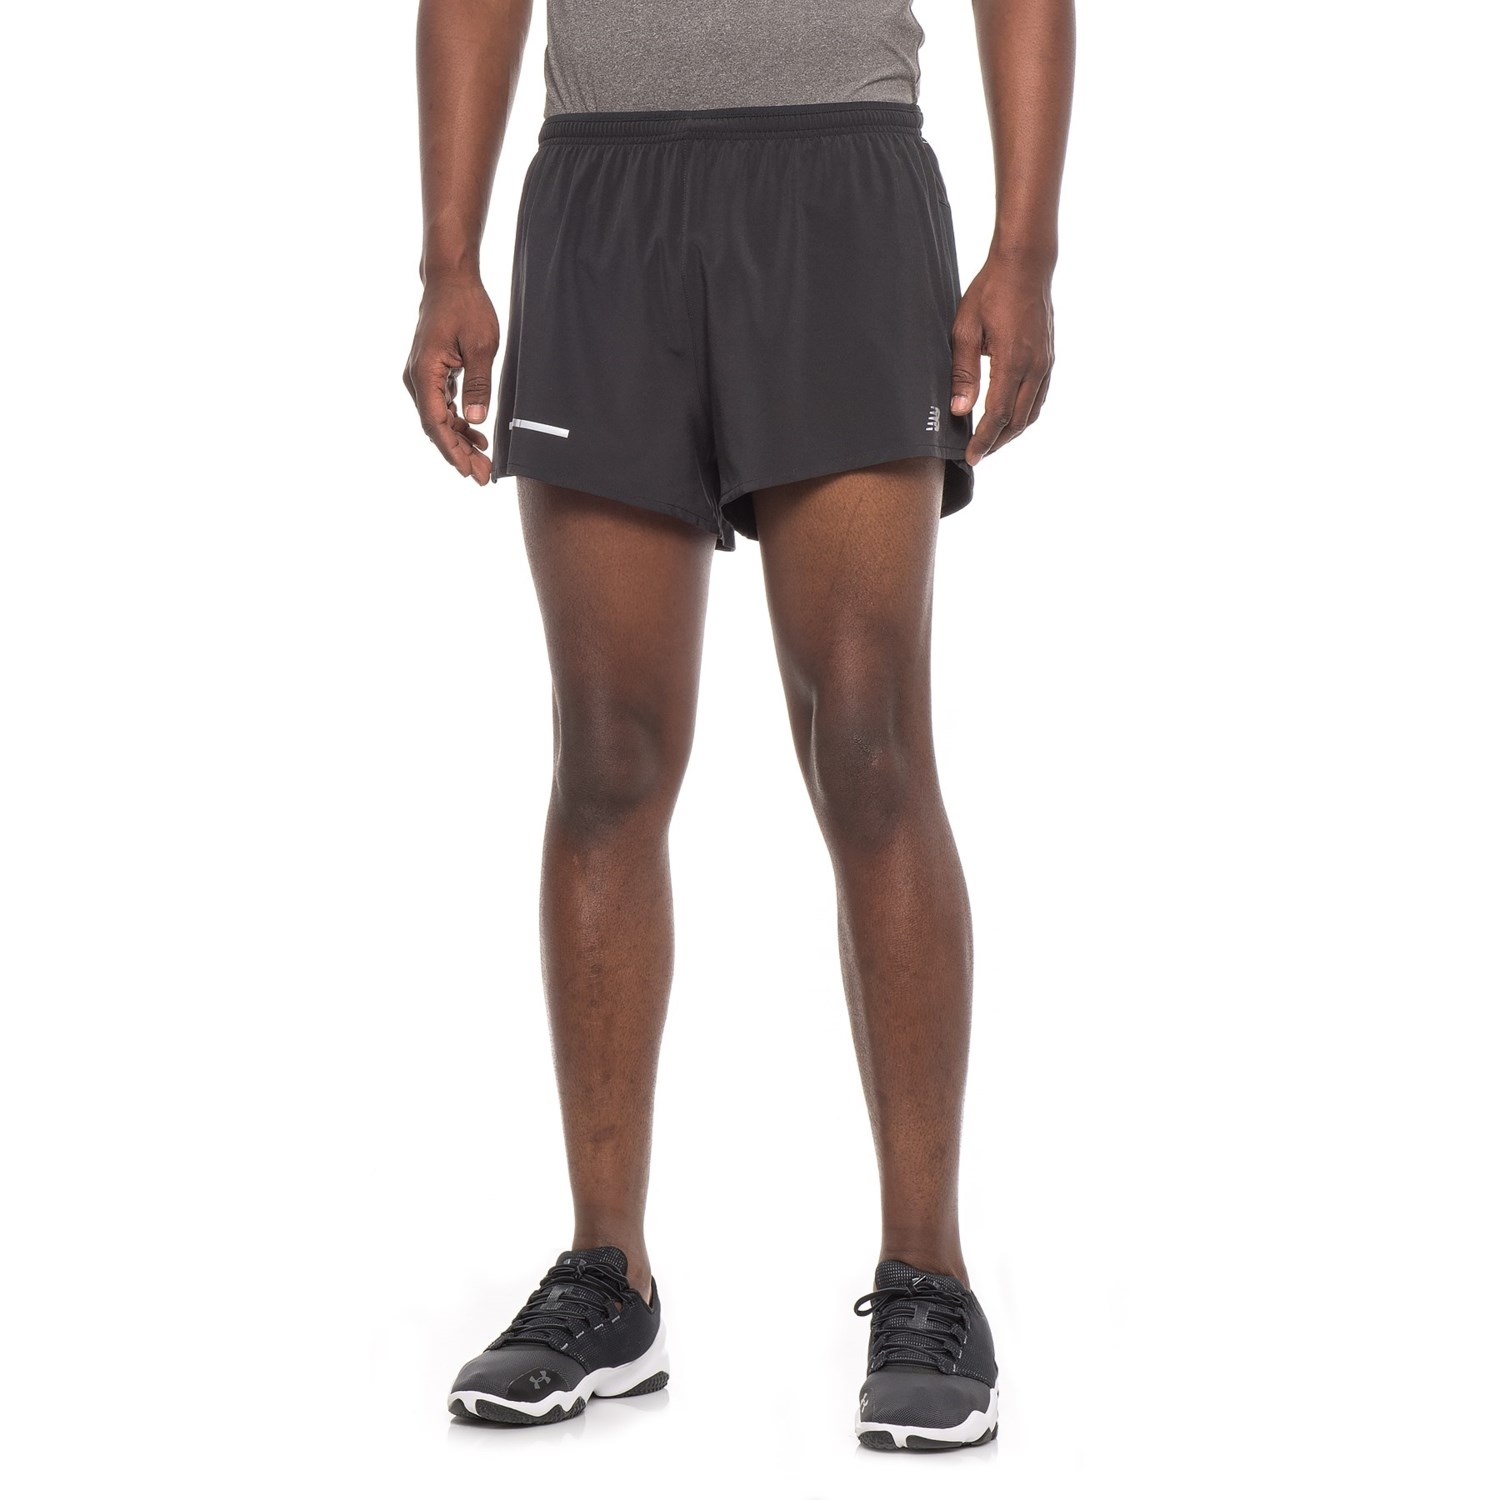 New Balance Impact Shorts – Built-In Briefs (For Men)